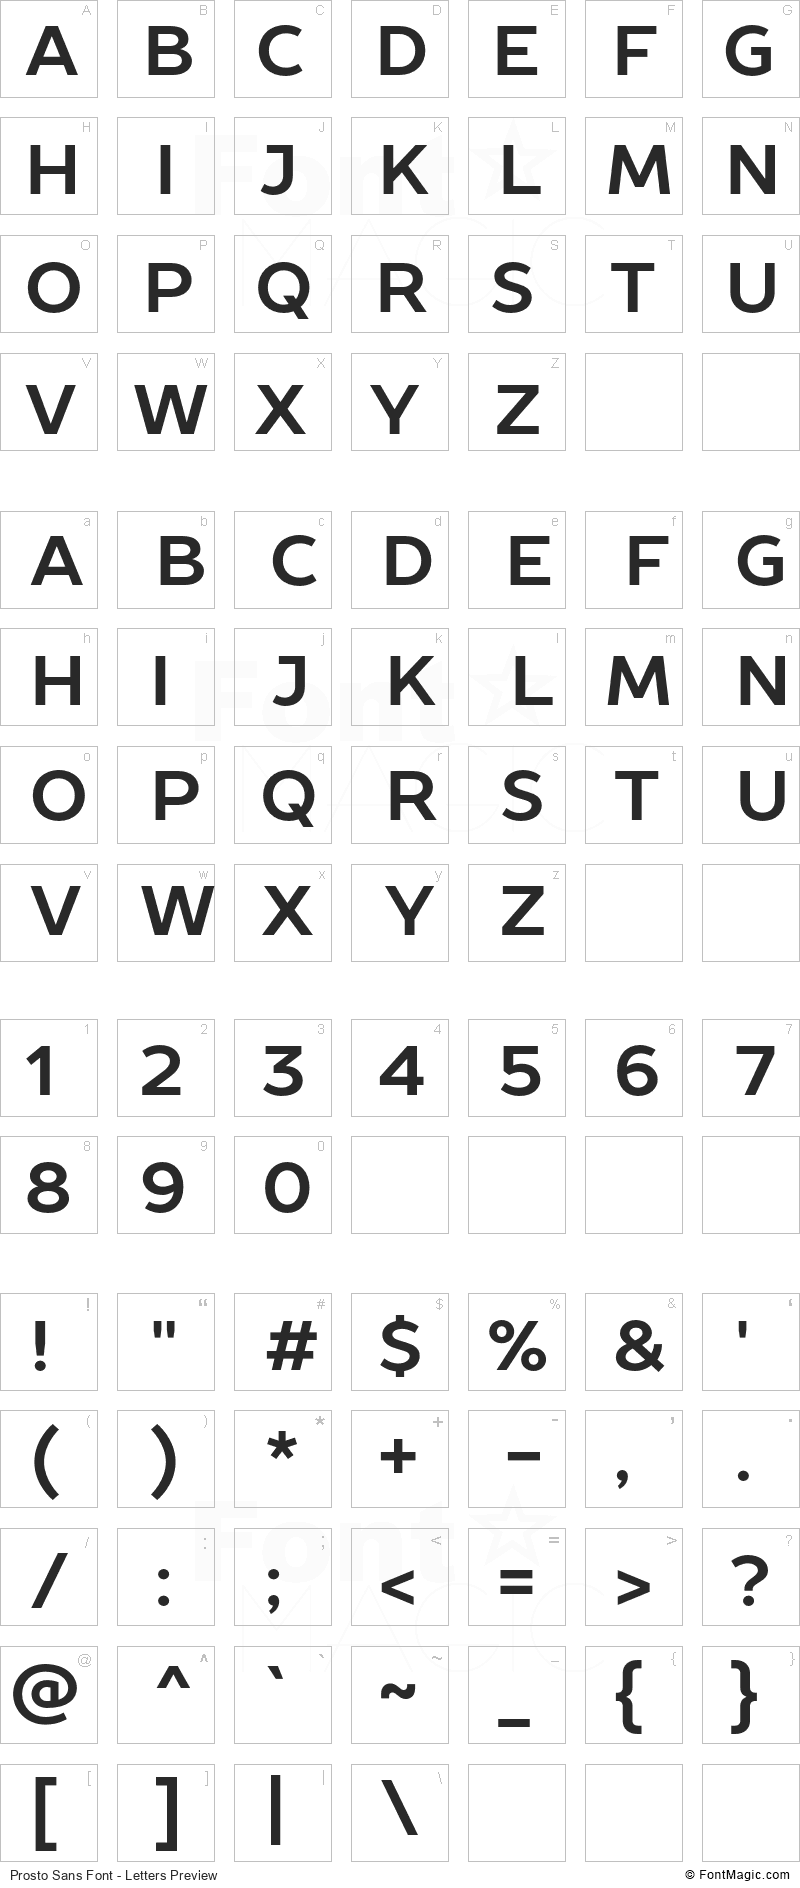 Prosto Sans Font - All Latters Preview Chart